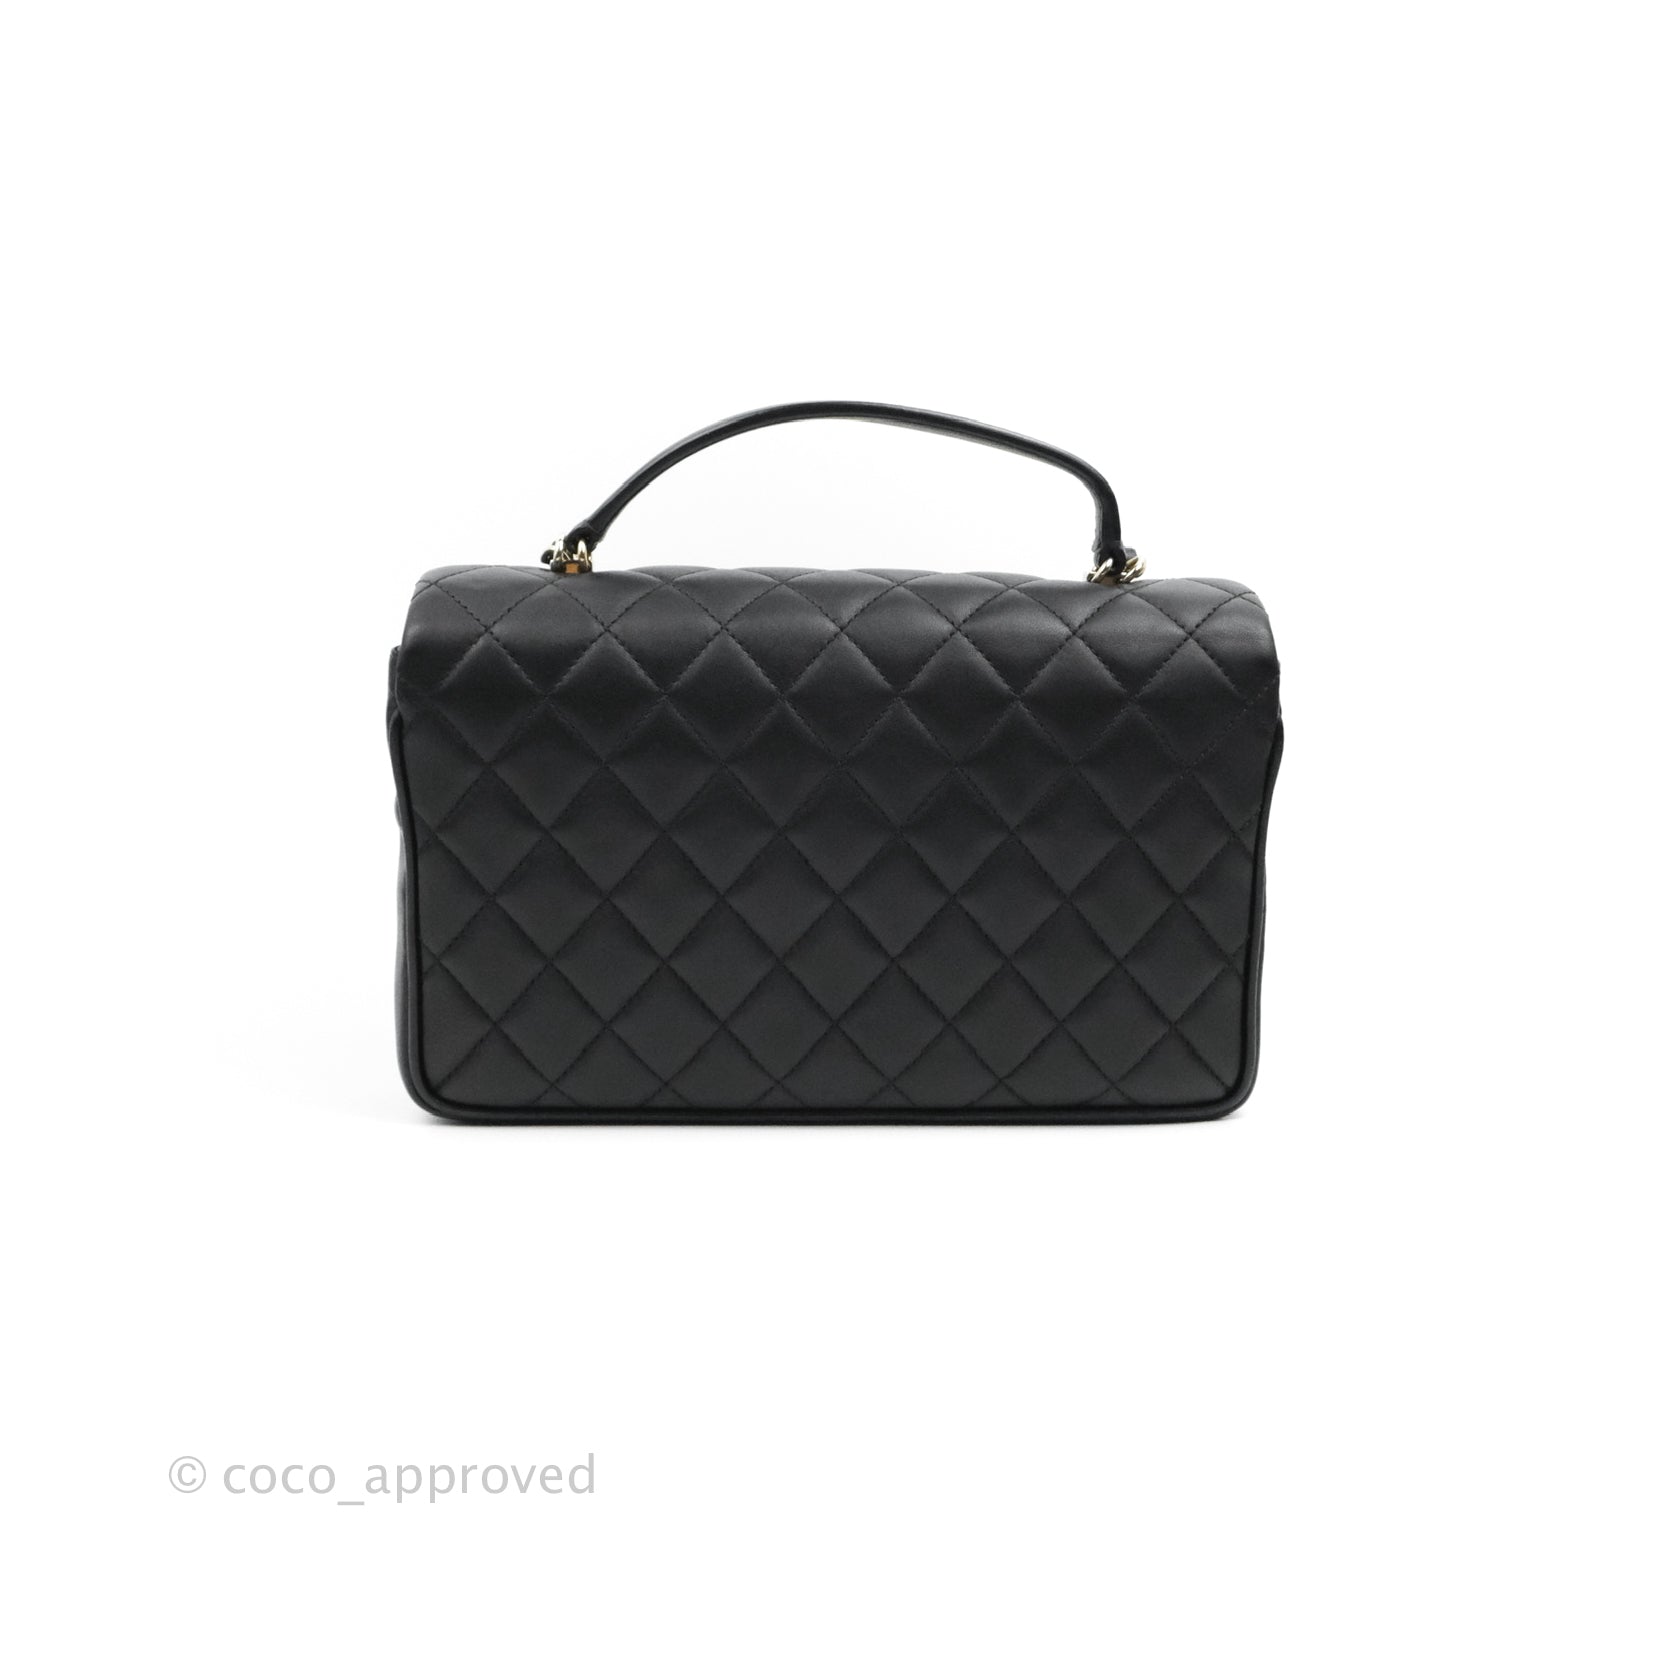 CHANEL Quilted Lambskin Leather Chain Clutch Bag Black